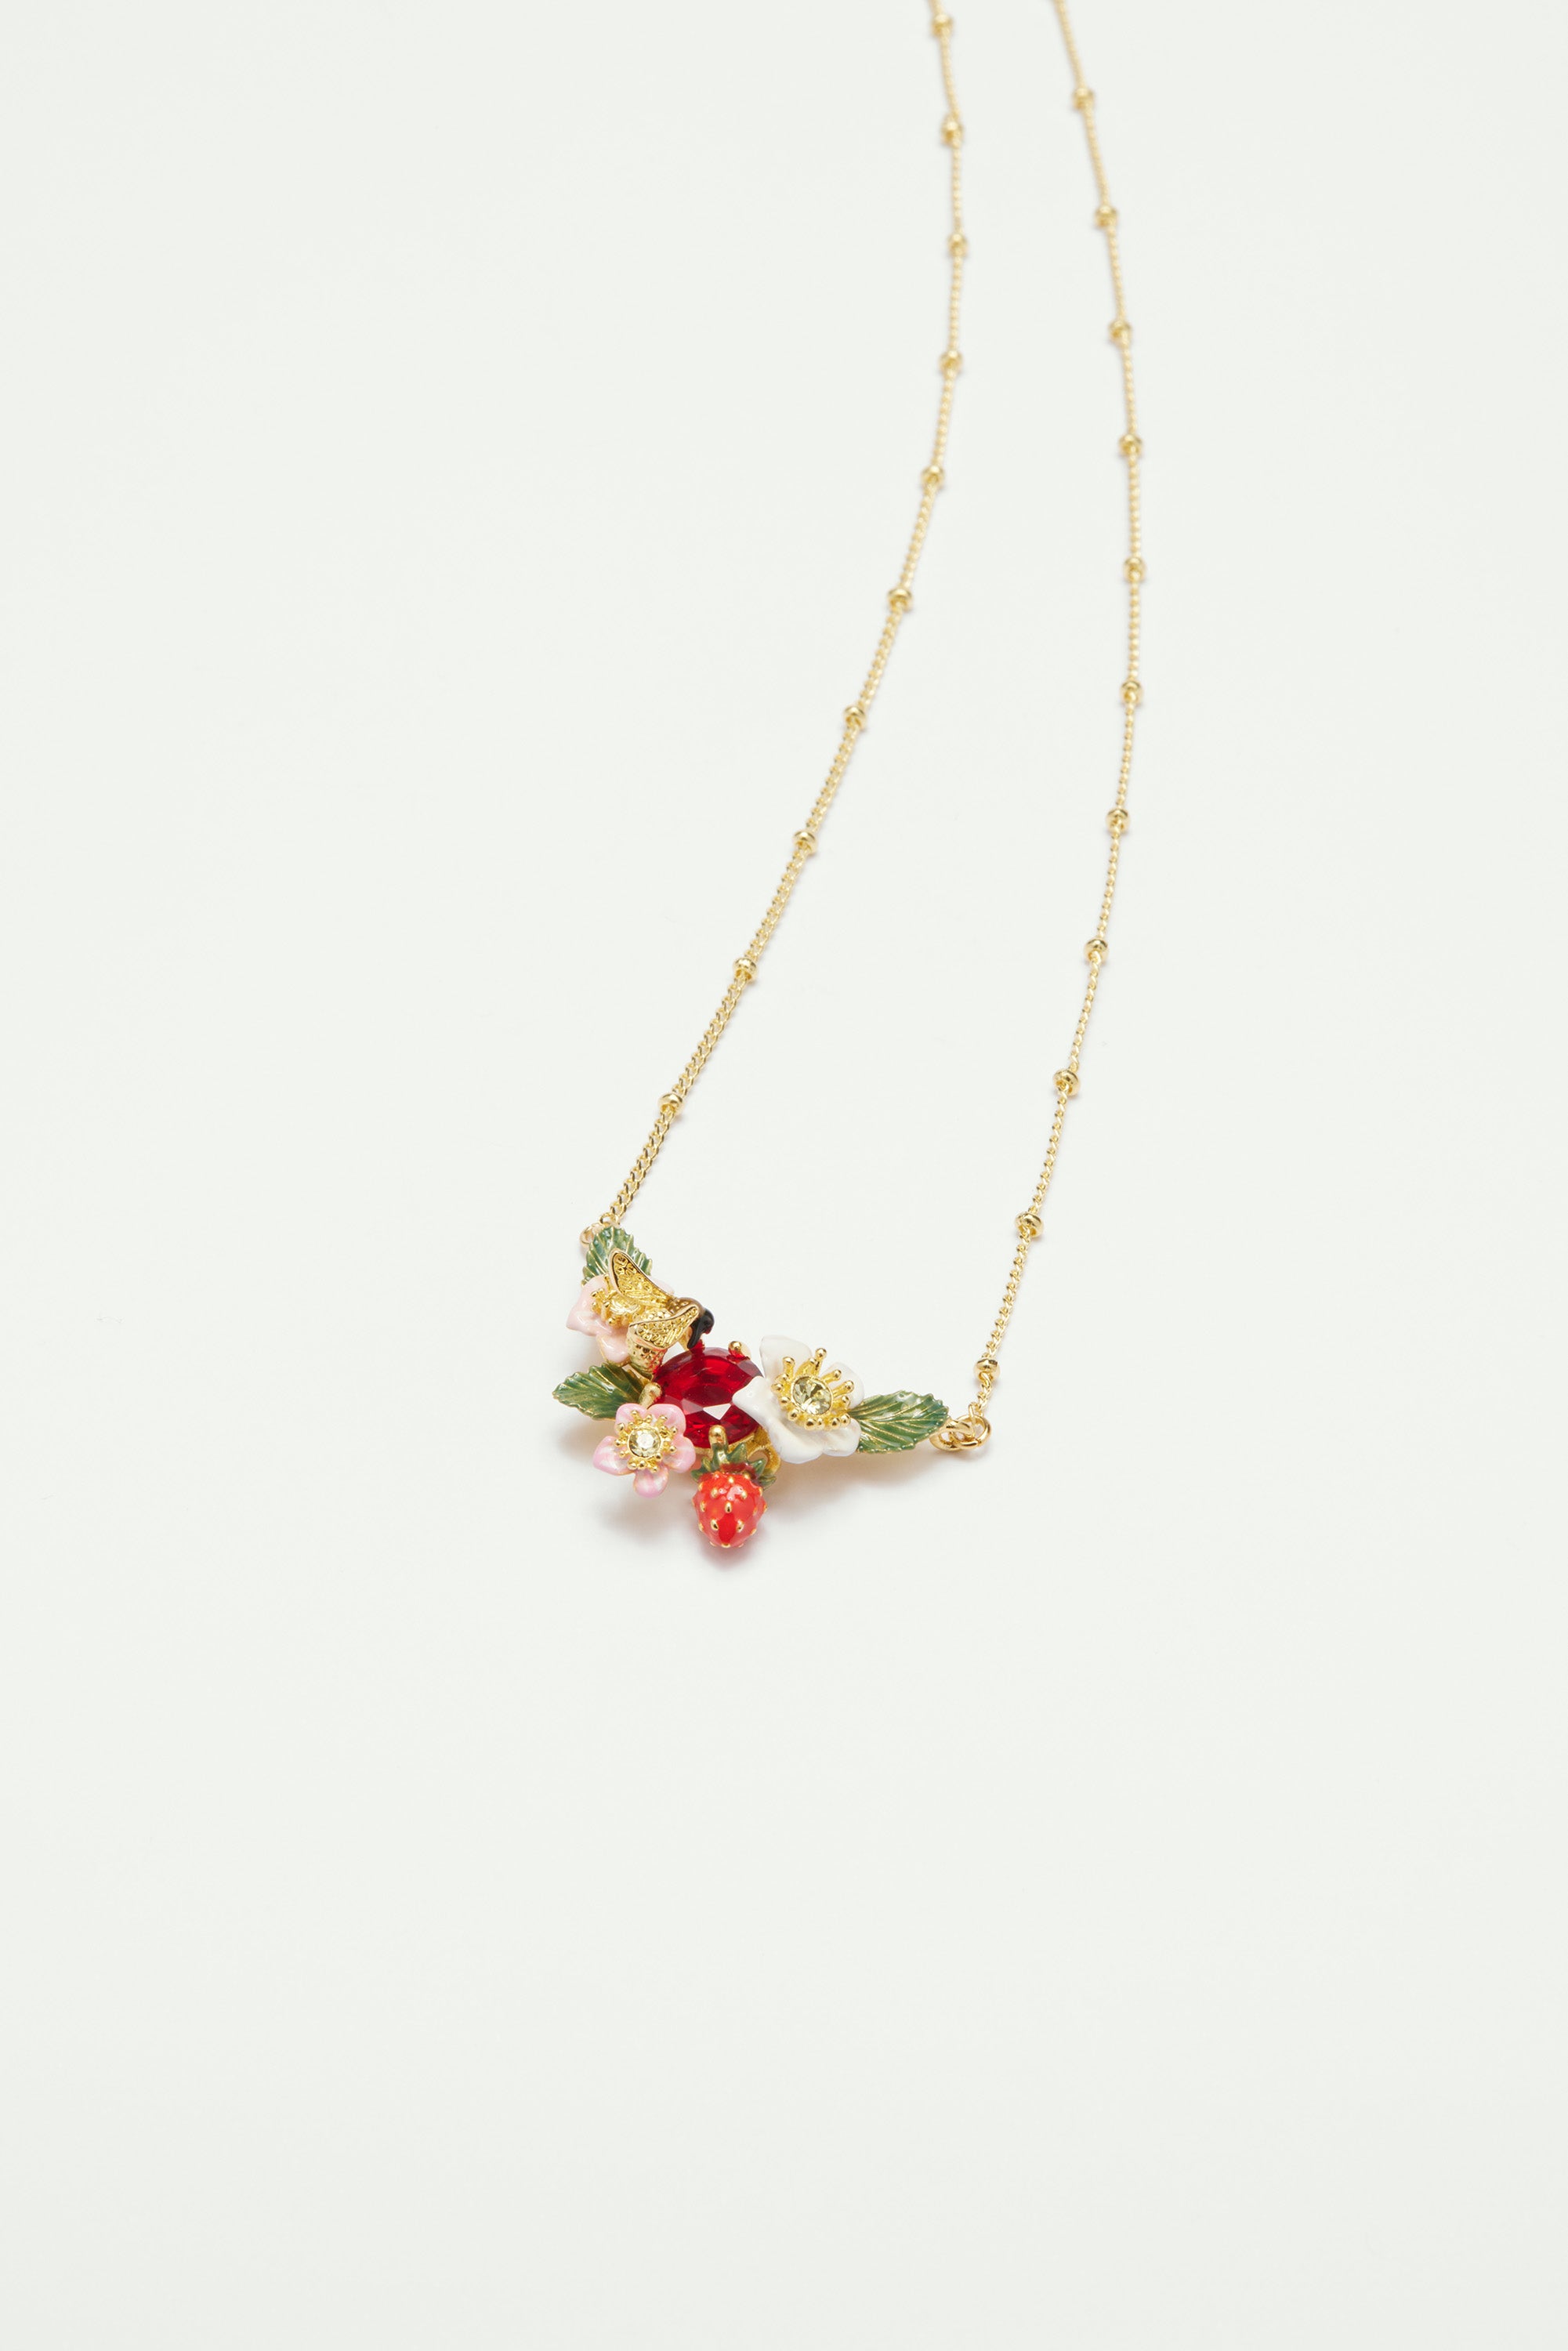 Wild strawberry, strawberry flower and bumblebee statement necklace